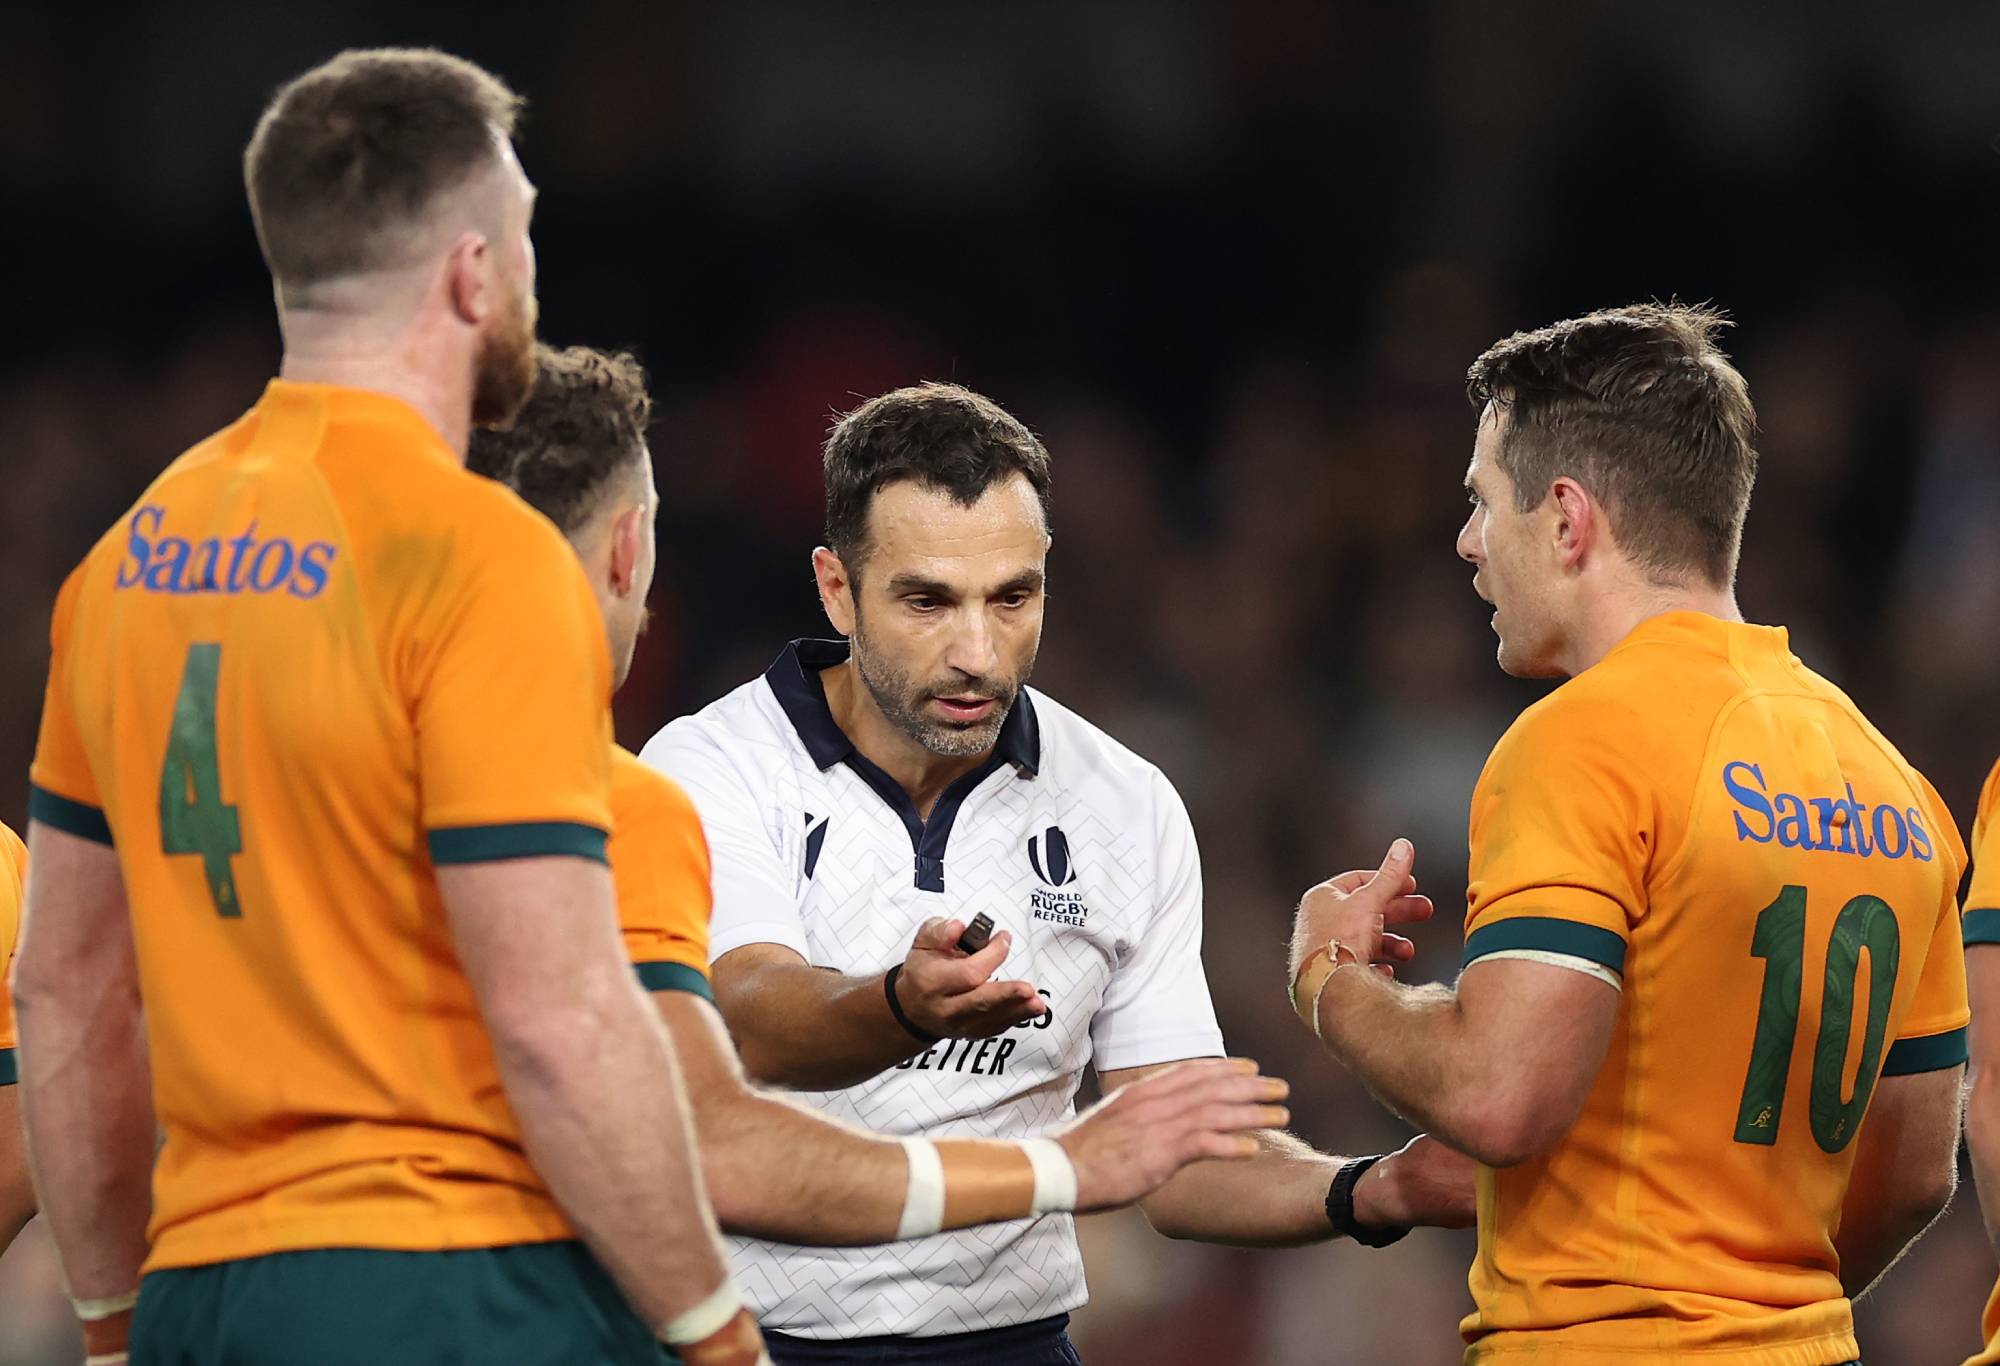 Referee Mathieu Raynal speaks to Nic White and Bernard Foley of the Wallabies during The Rugby Championship & Bledisloe Cup match between the Australia Wallabies and the New Zealand All Blacks at Marvel Stadium on September 15, 2022 in Melbourne, Australia. (Photo by Cameron Spencer/Getty Images)